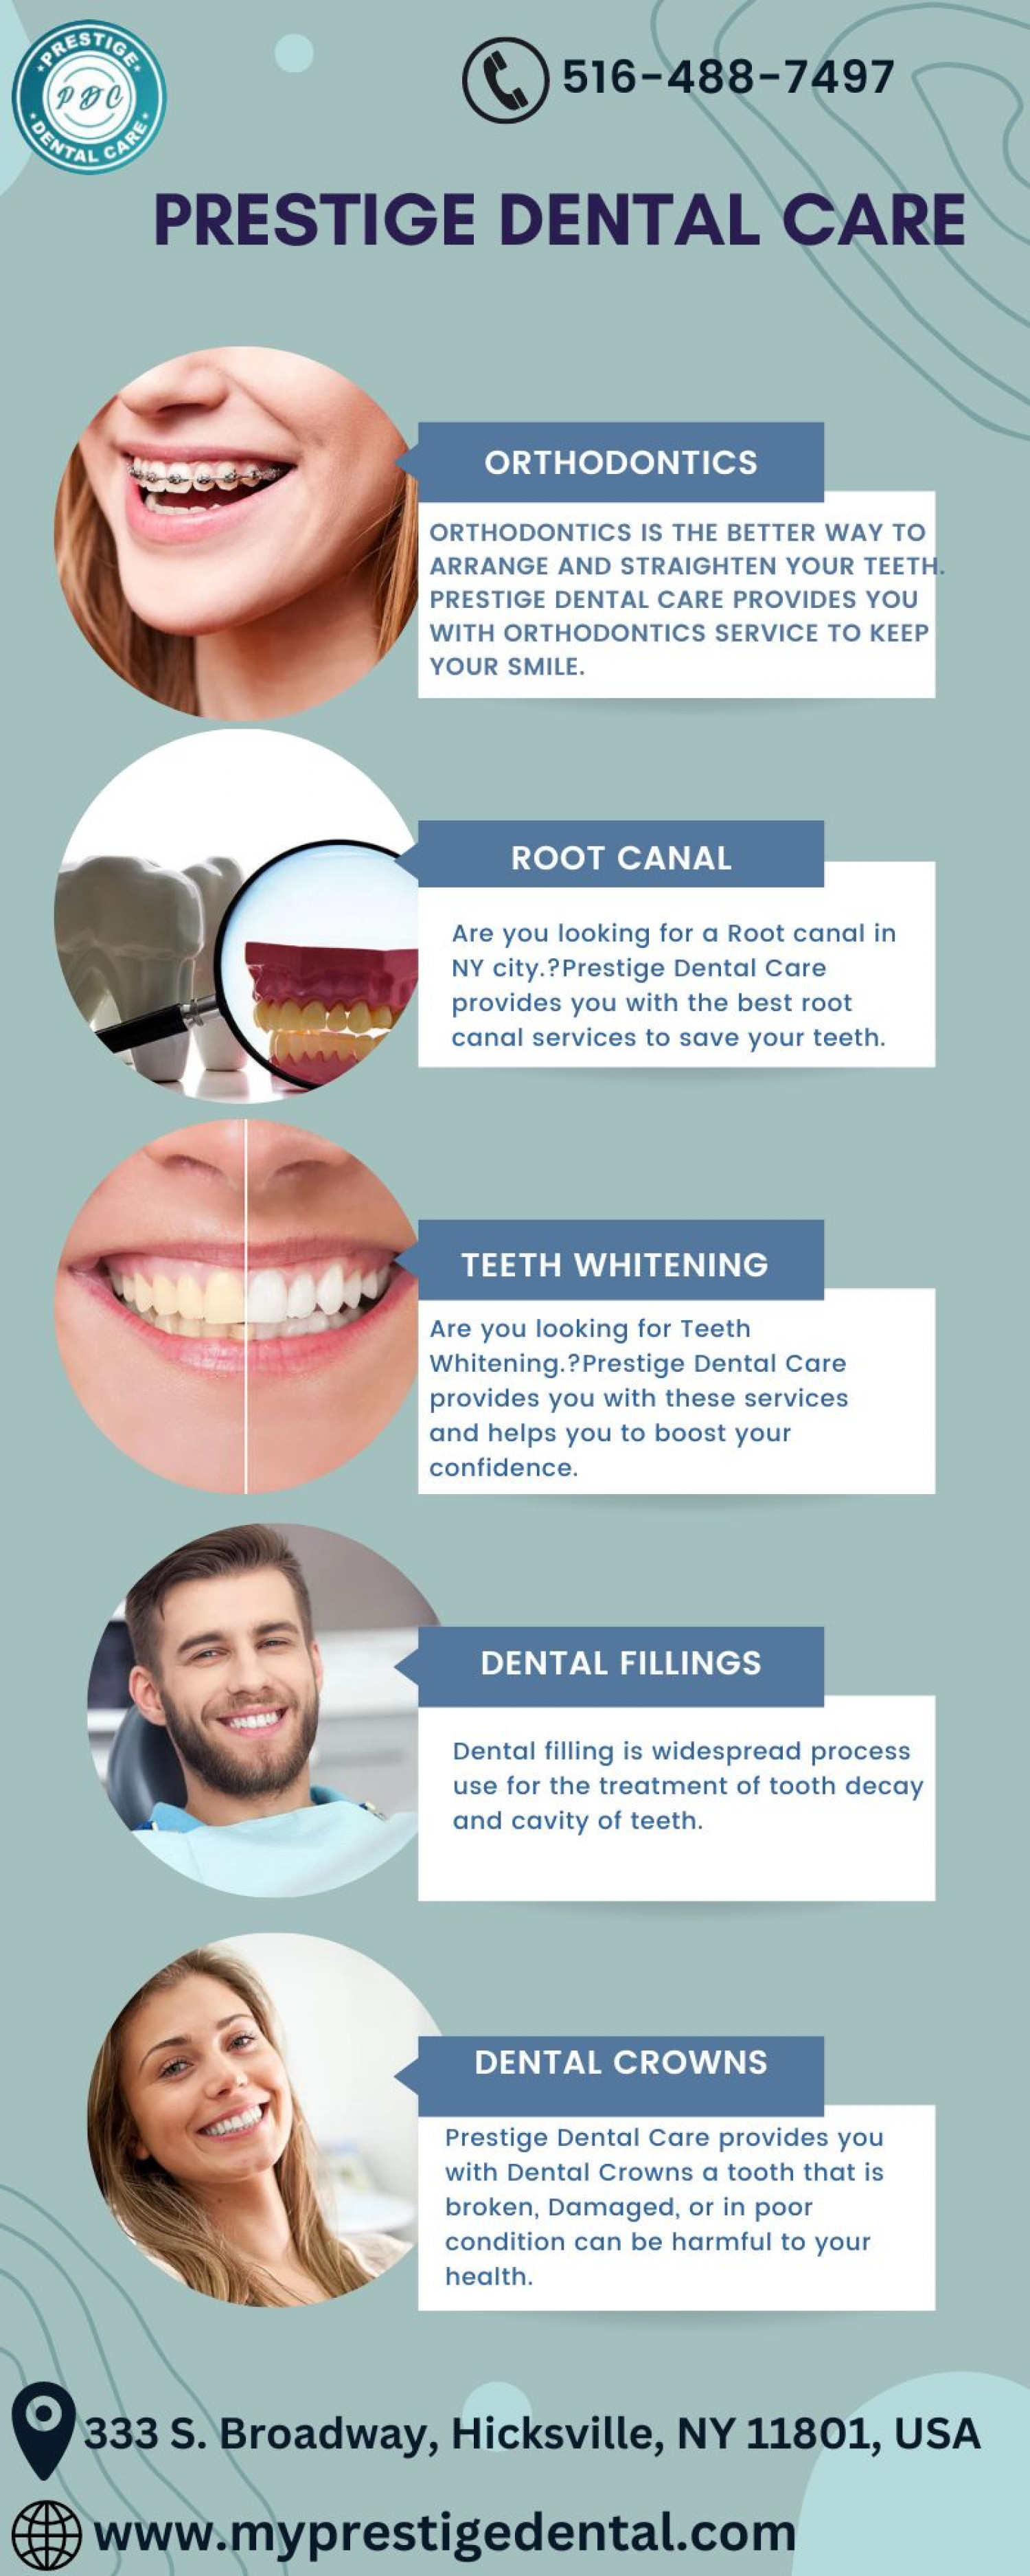 Best Teeth whitening in NY Infographic